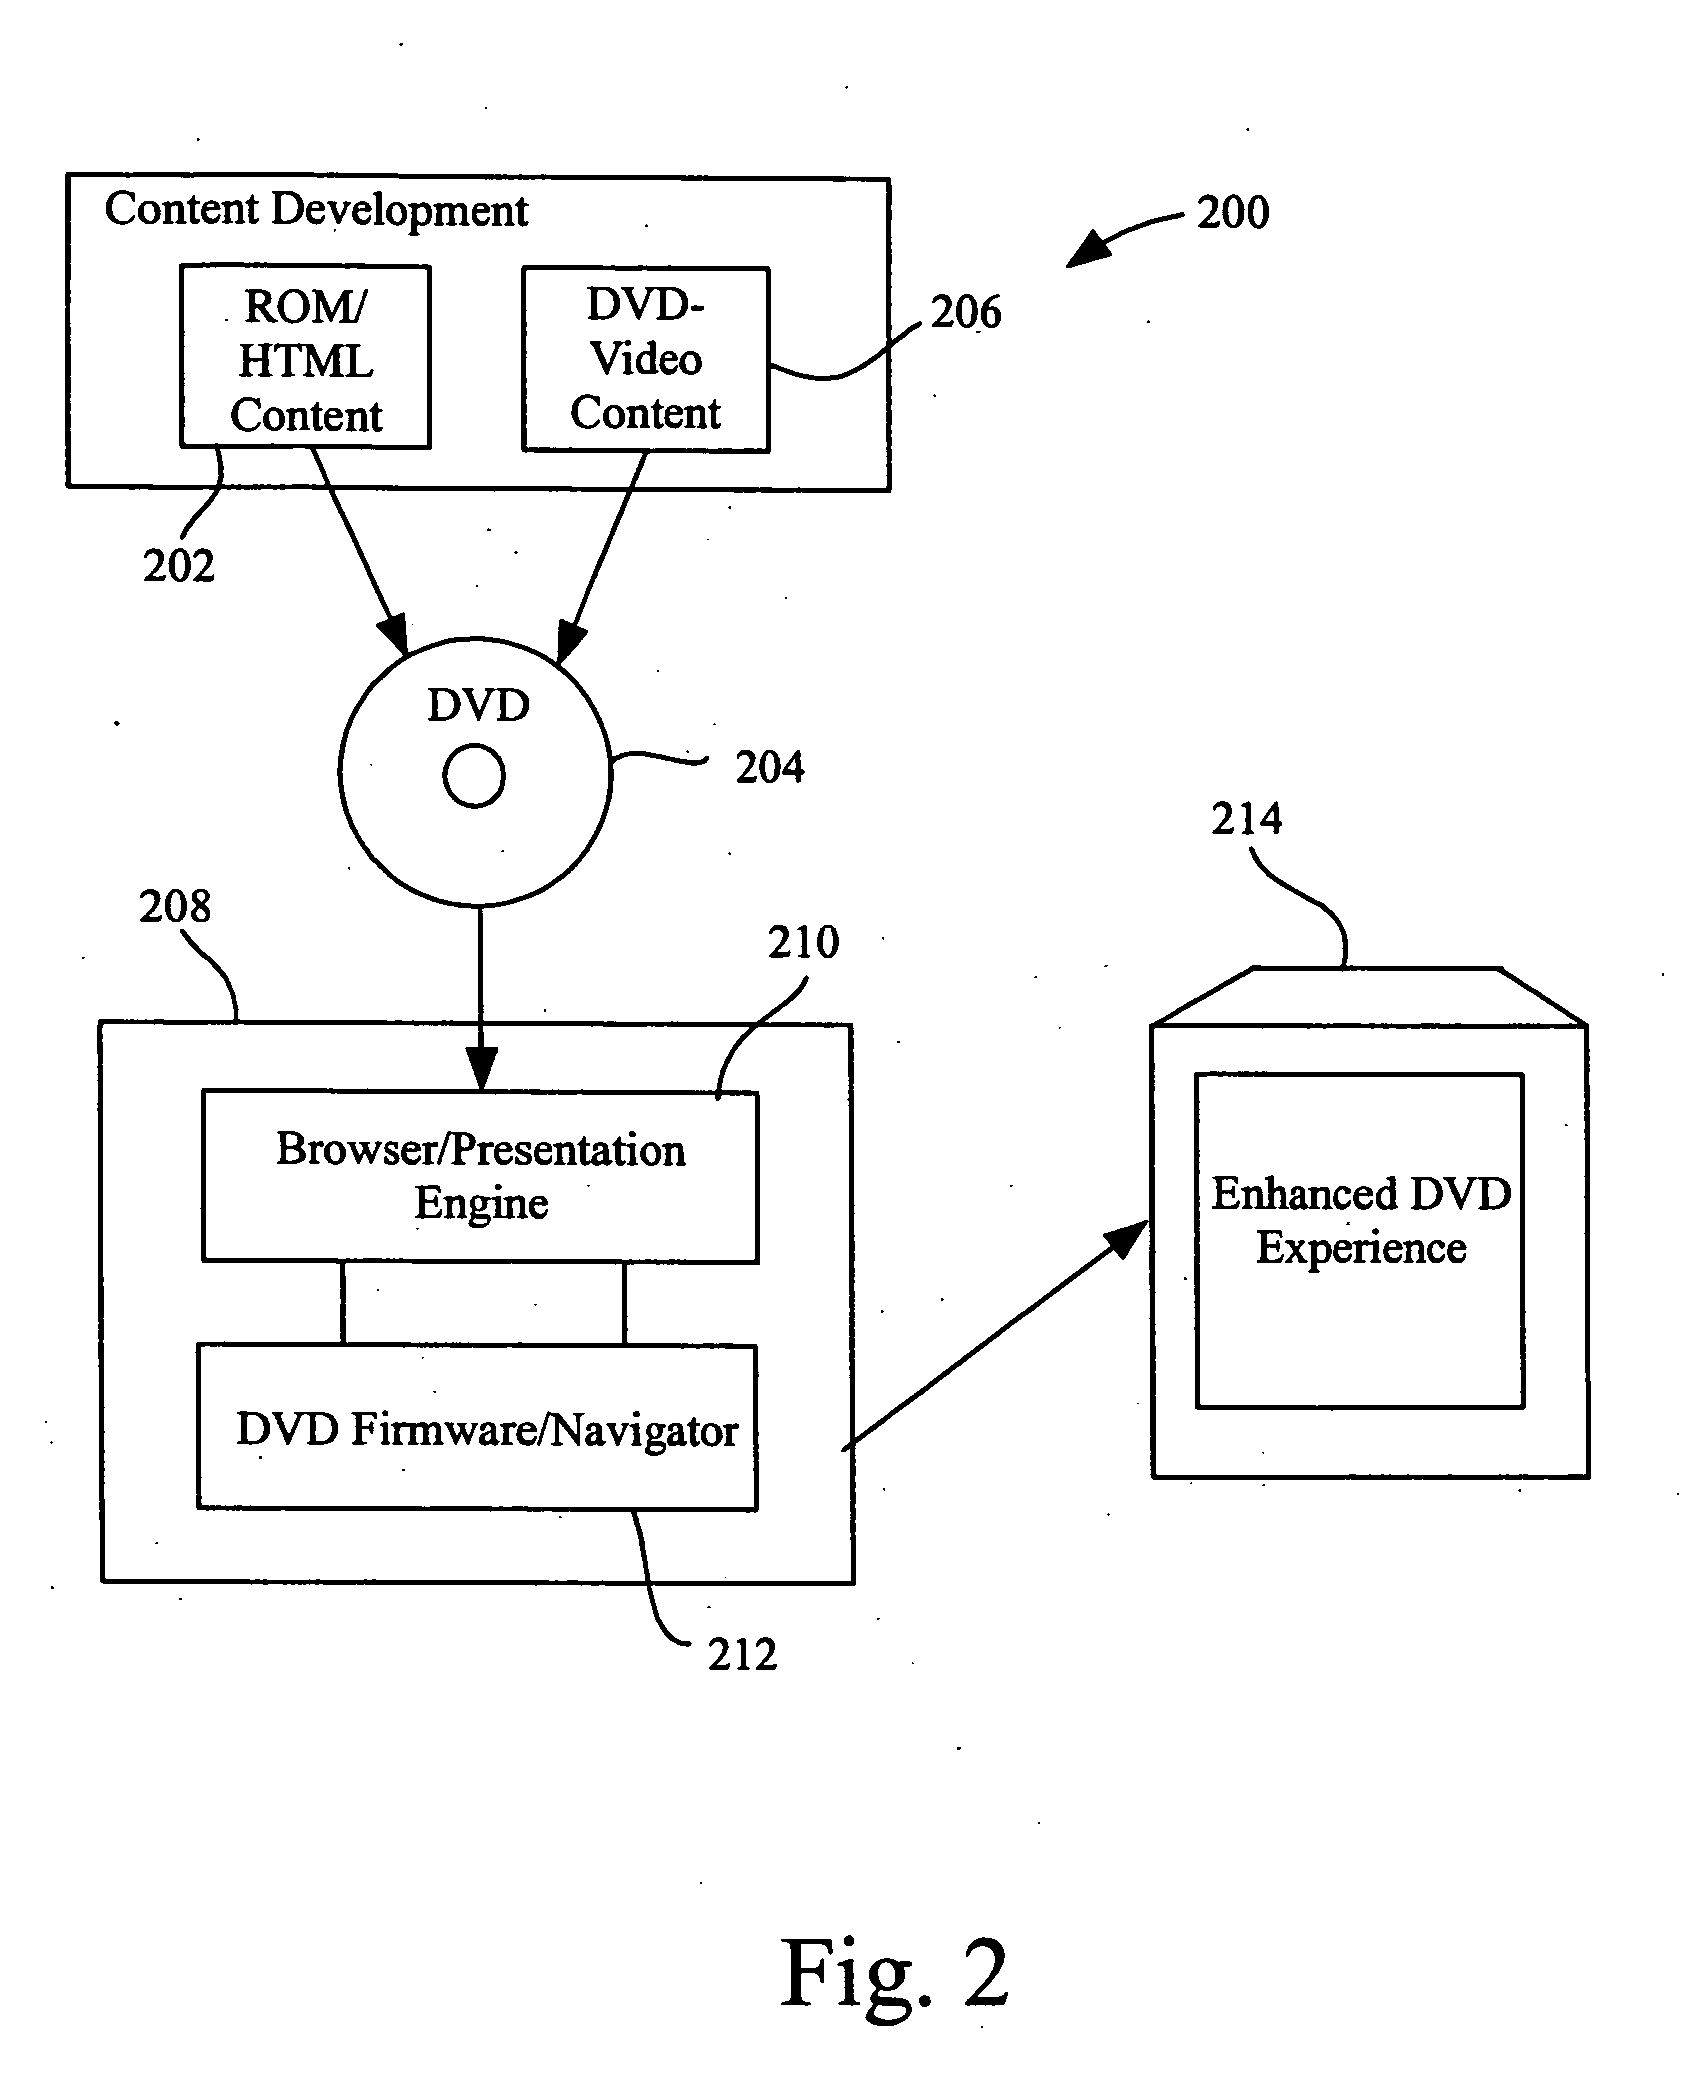 System, method and article of manufacture for a common cross platform framework for development of DVD-video content integrated with ROM content